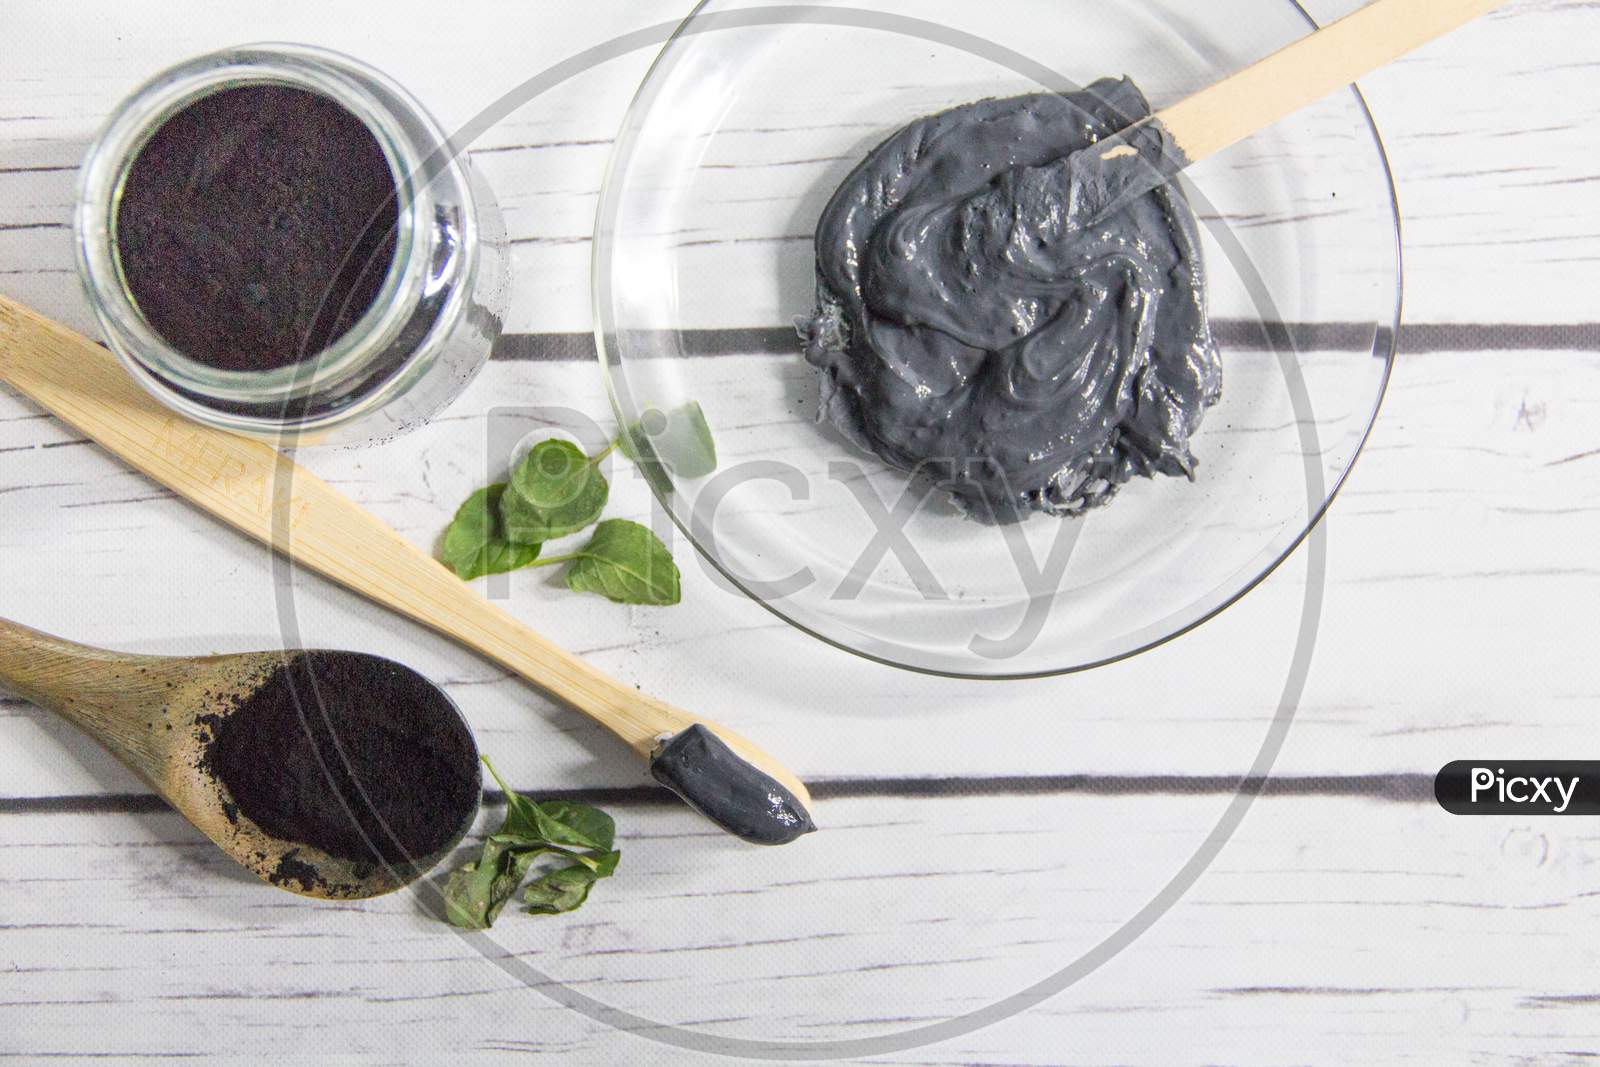 Ingredients For Making Activated Charcoal Toothpaste